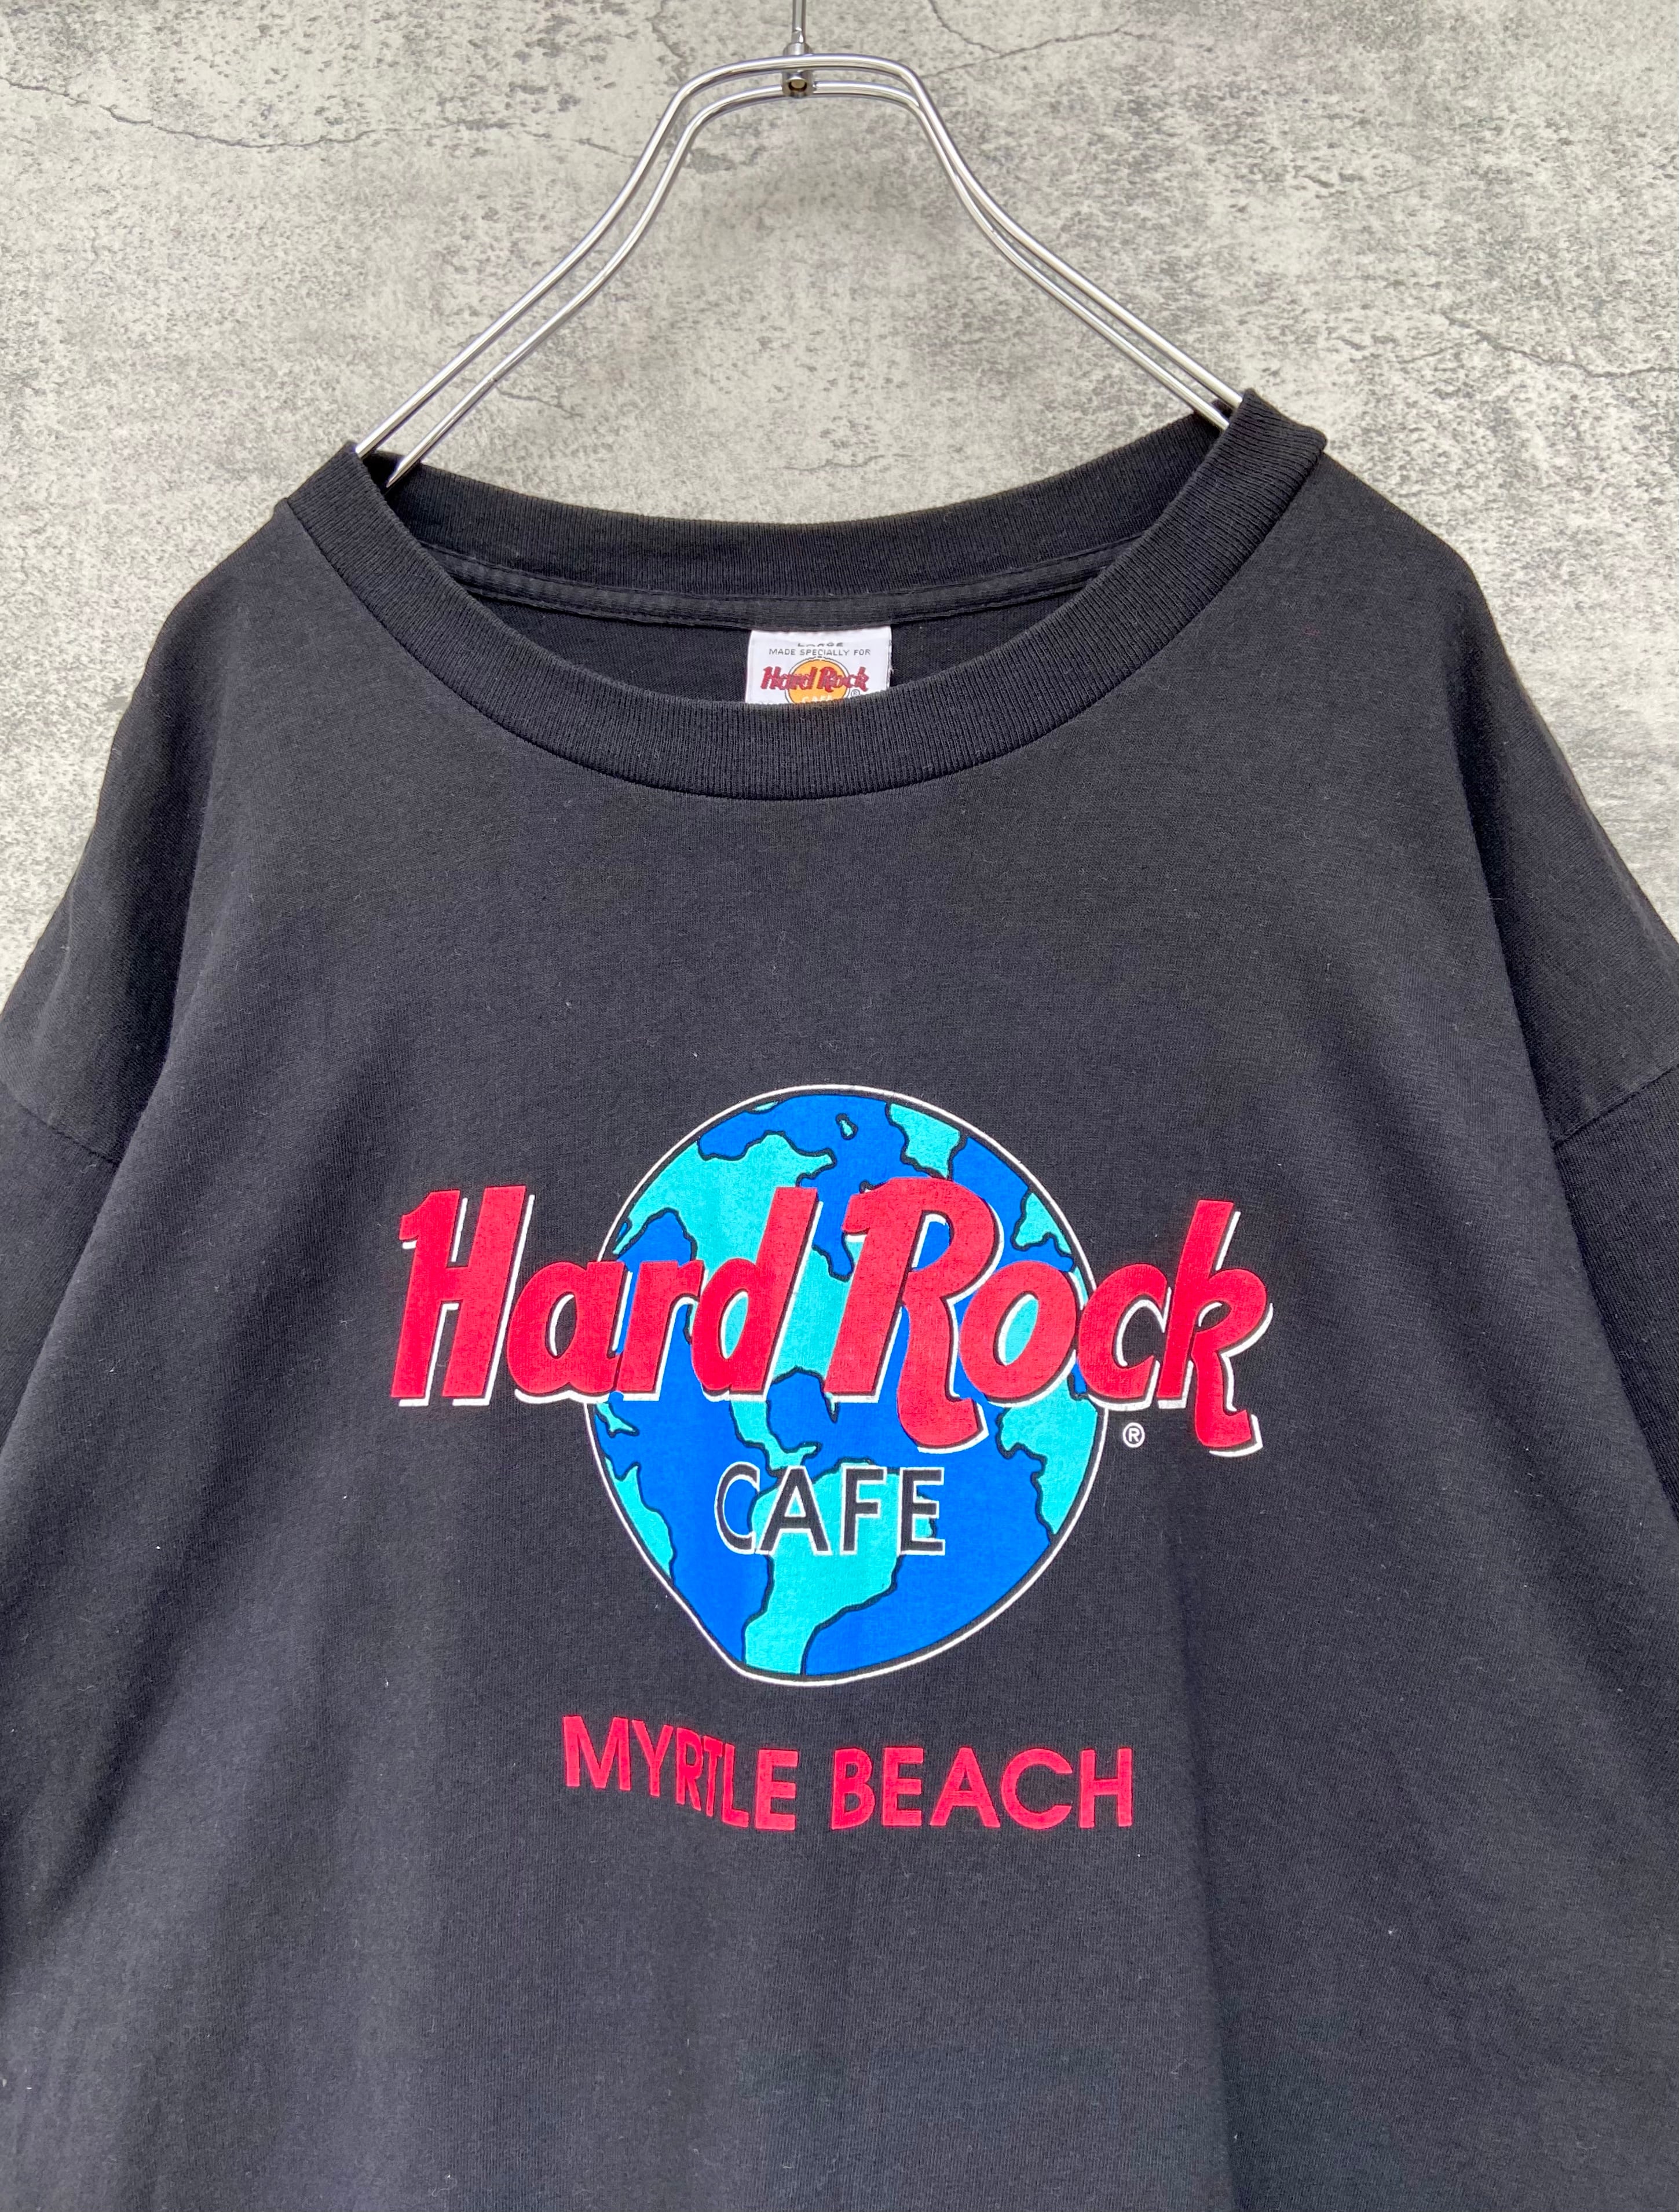 USA製 90s HardRock Cafe ハードロックカフェ Tシャツ 黒 プリントロゴ ...